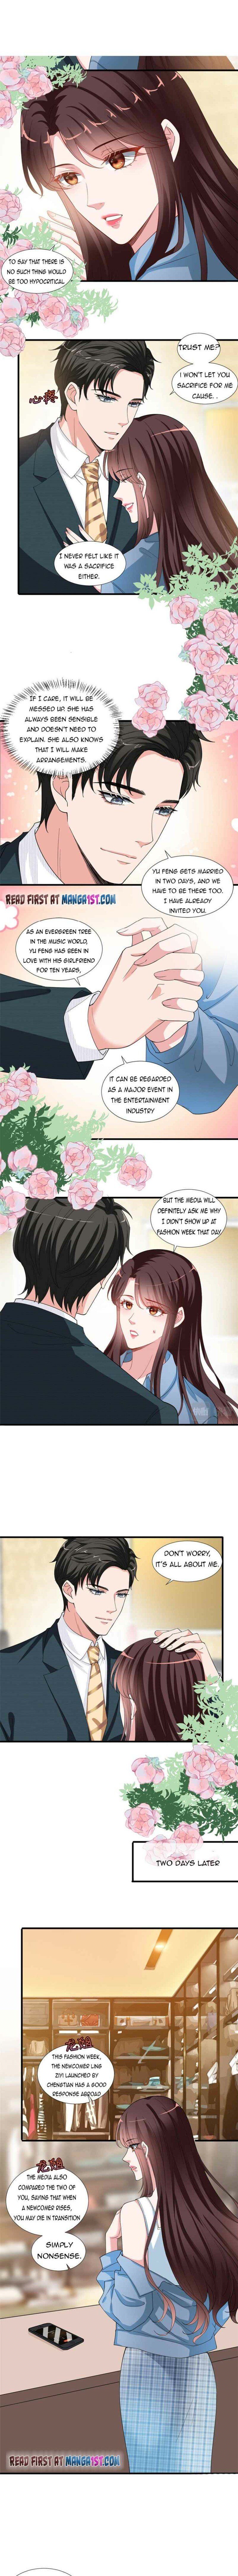 Trial Marriage Husband: Need to Work Hard Chapter 214 page 3